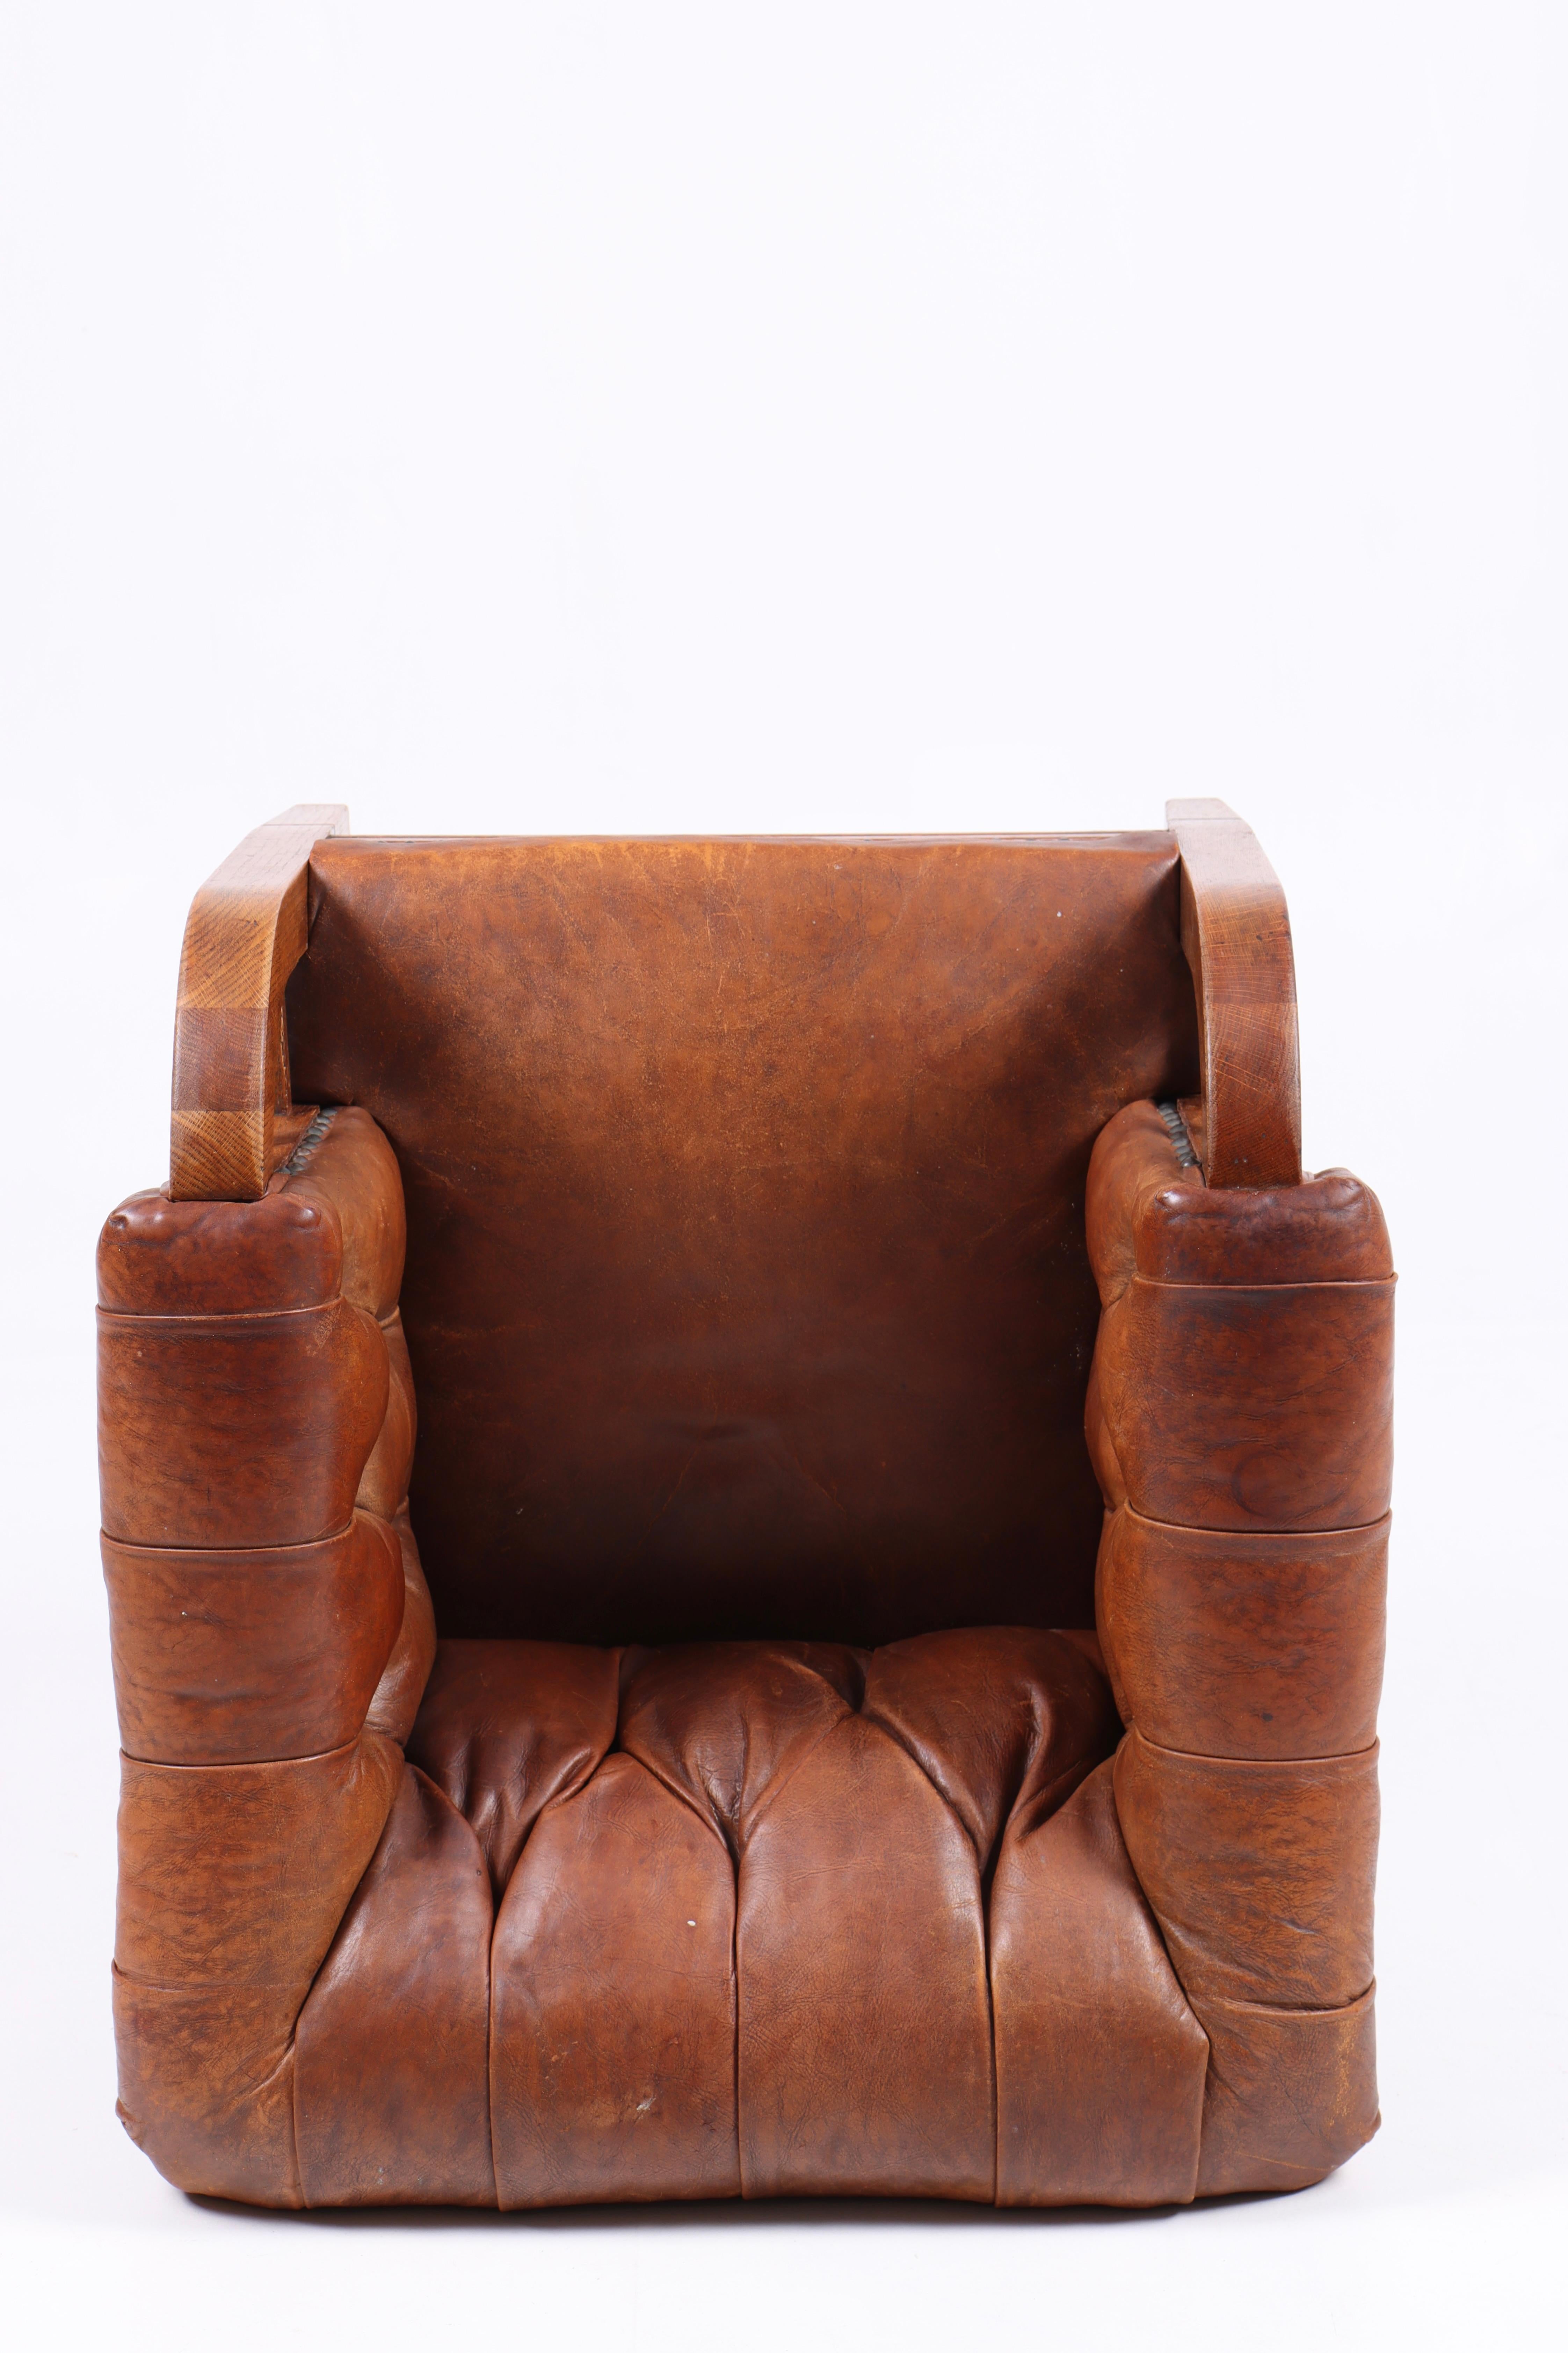 Lounge Chair in Patinated Leather, Made in Denmark, 1940s For Sale 3